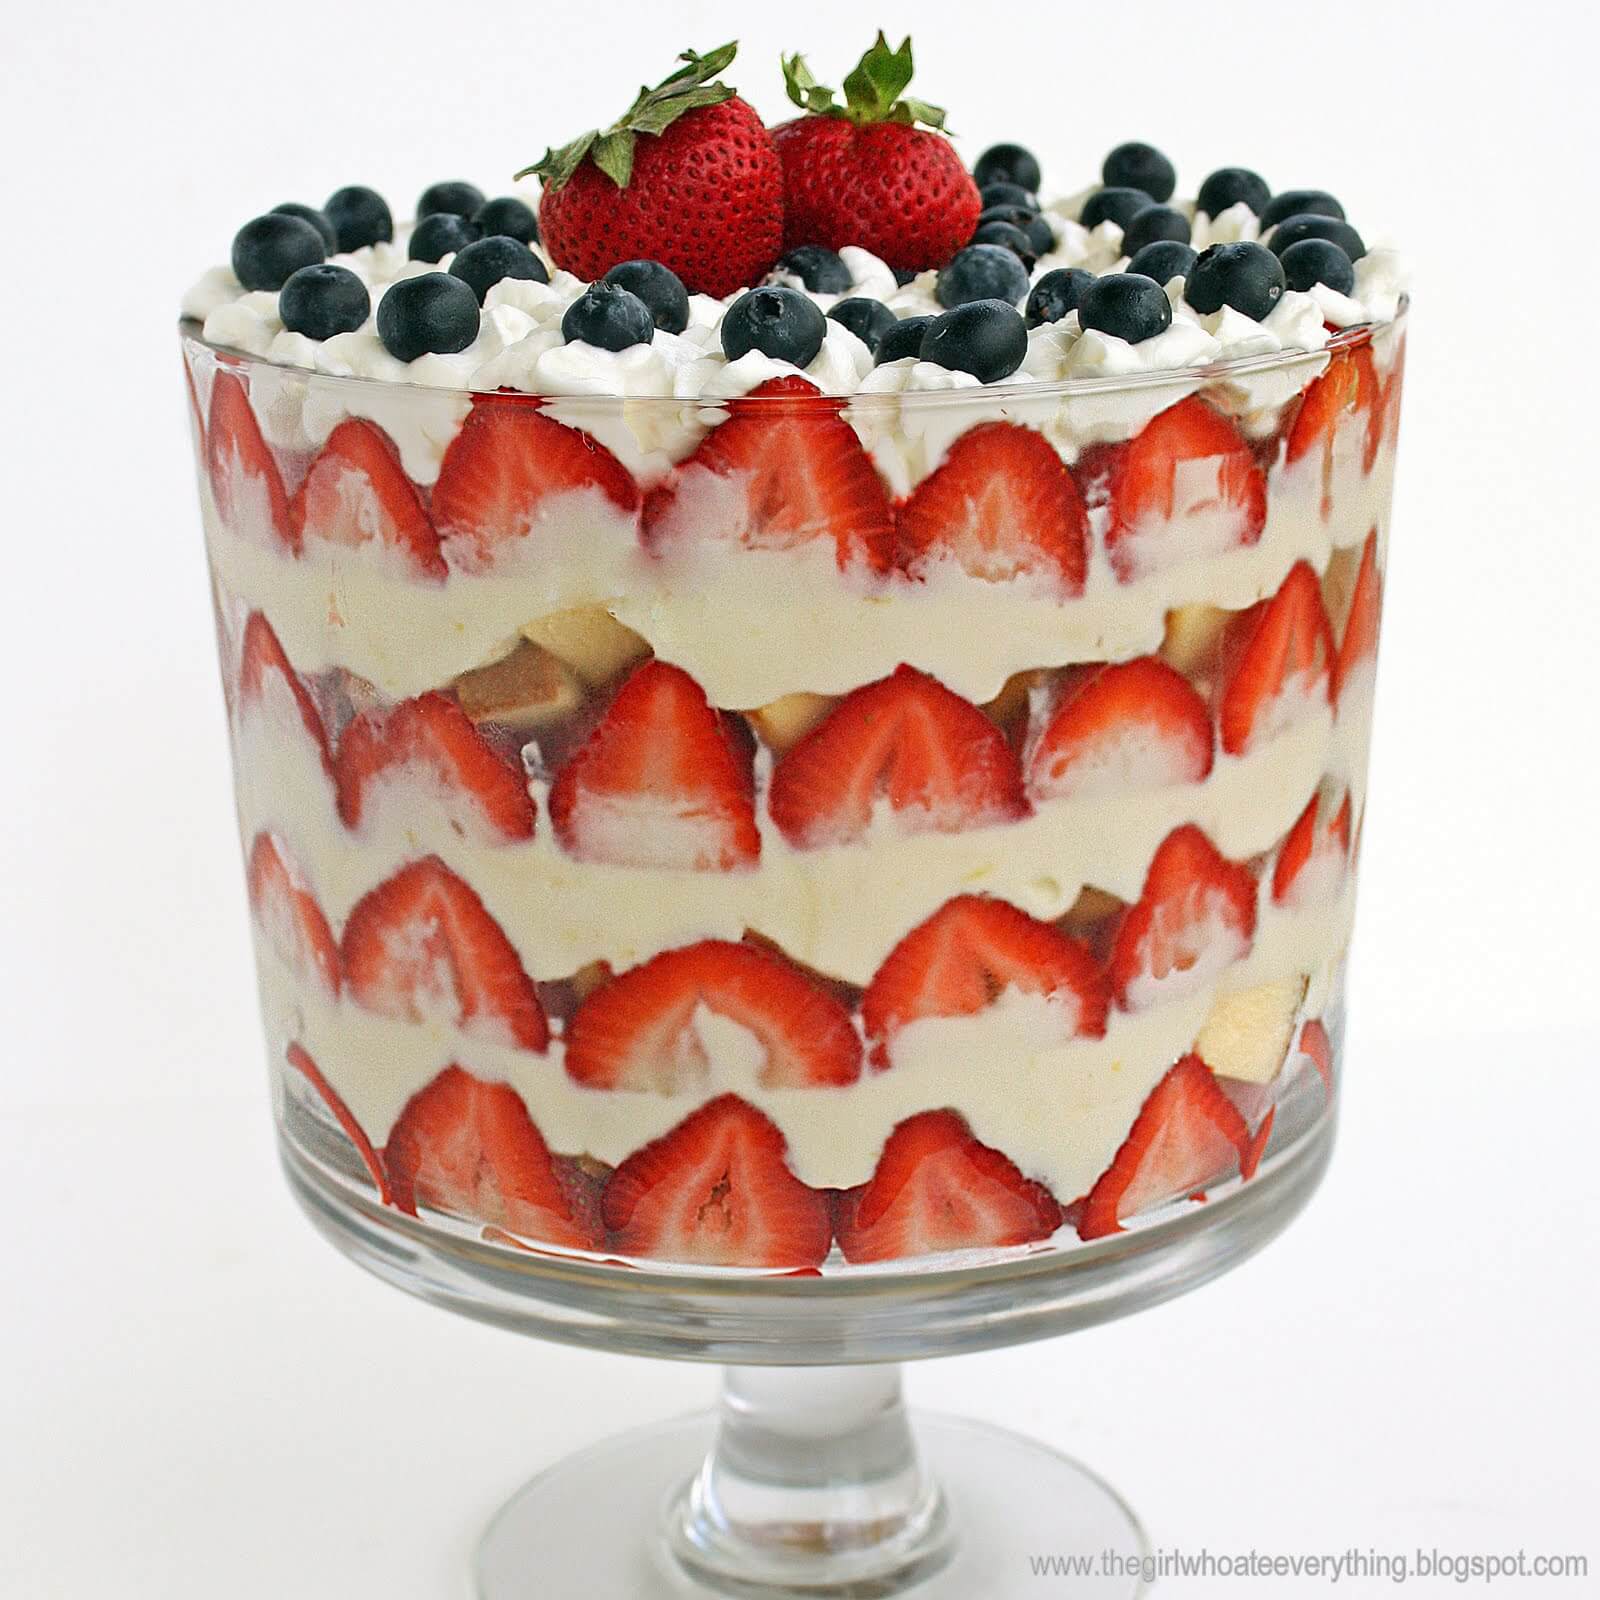 Kitchen goodness in a trifle with strawberries, pound cake, and whip cream